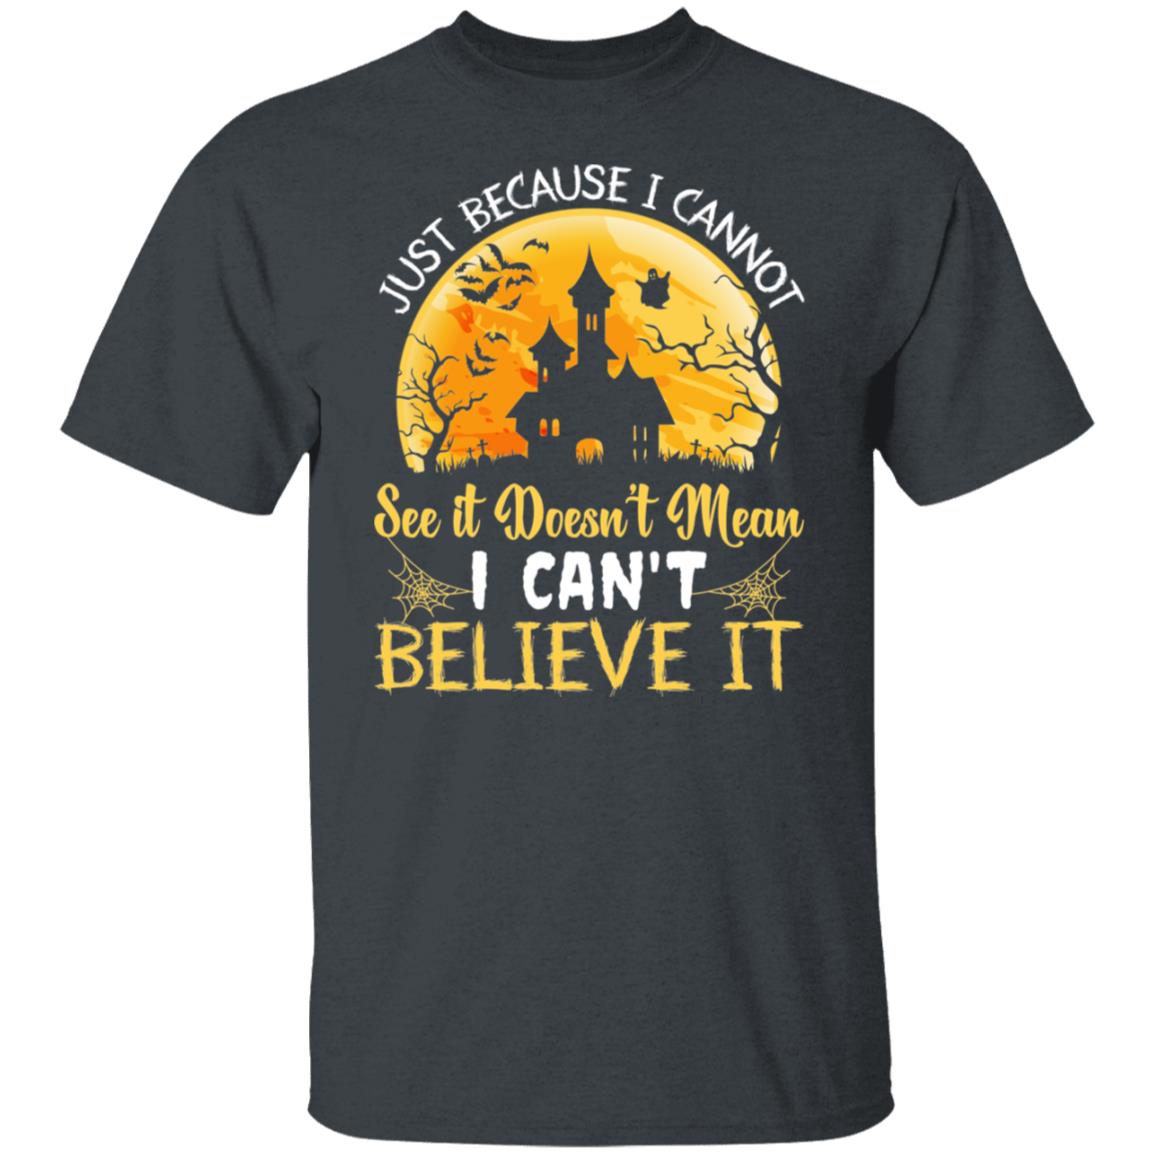 Just Because I Cannot See it Doesn't Mean I Can't Believe It Shirt